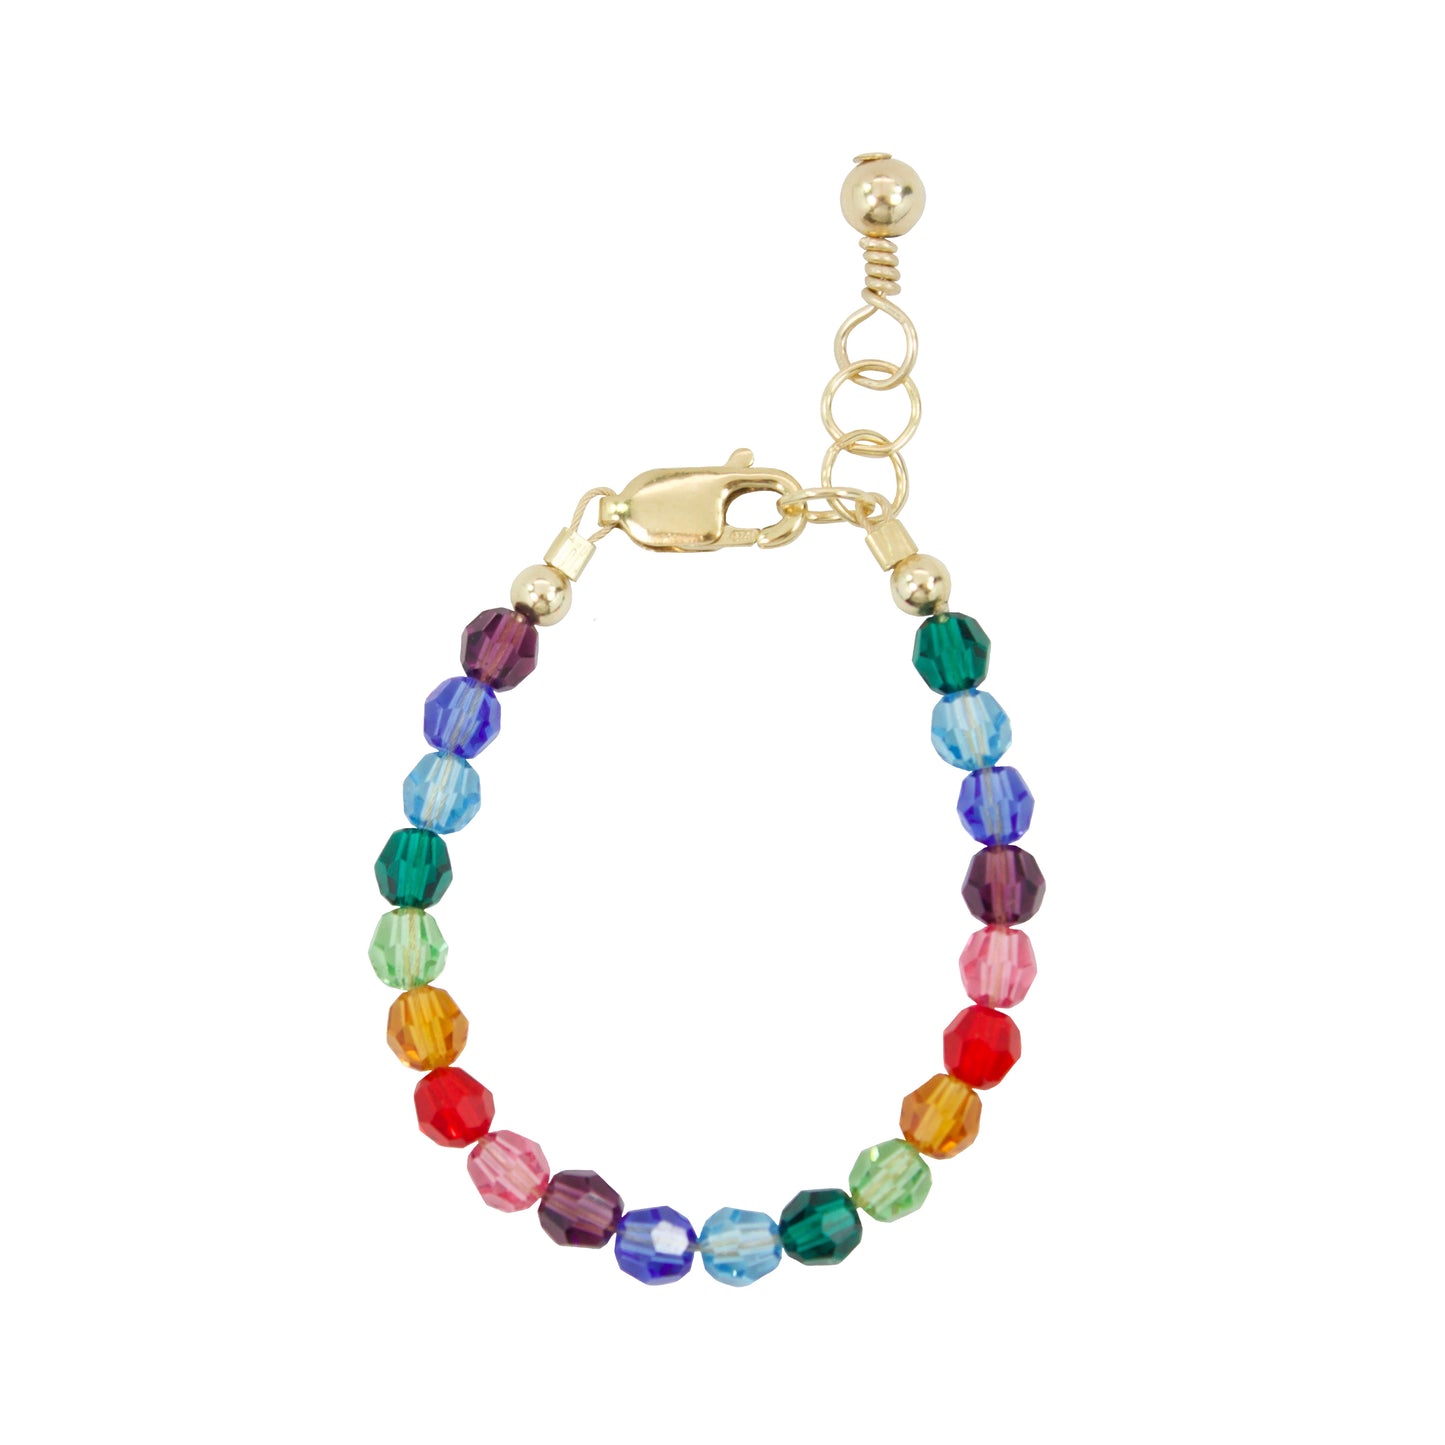 Rainbow Baby Bracelet (4mm Beads) 5 Inches / Gold Filled